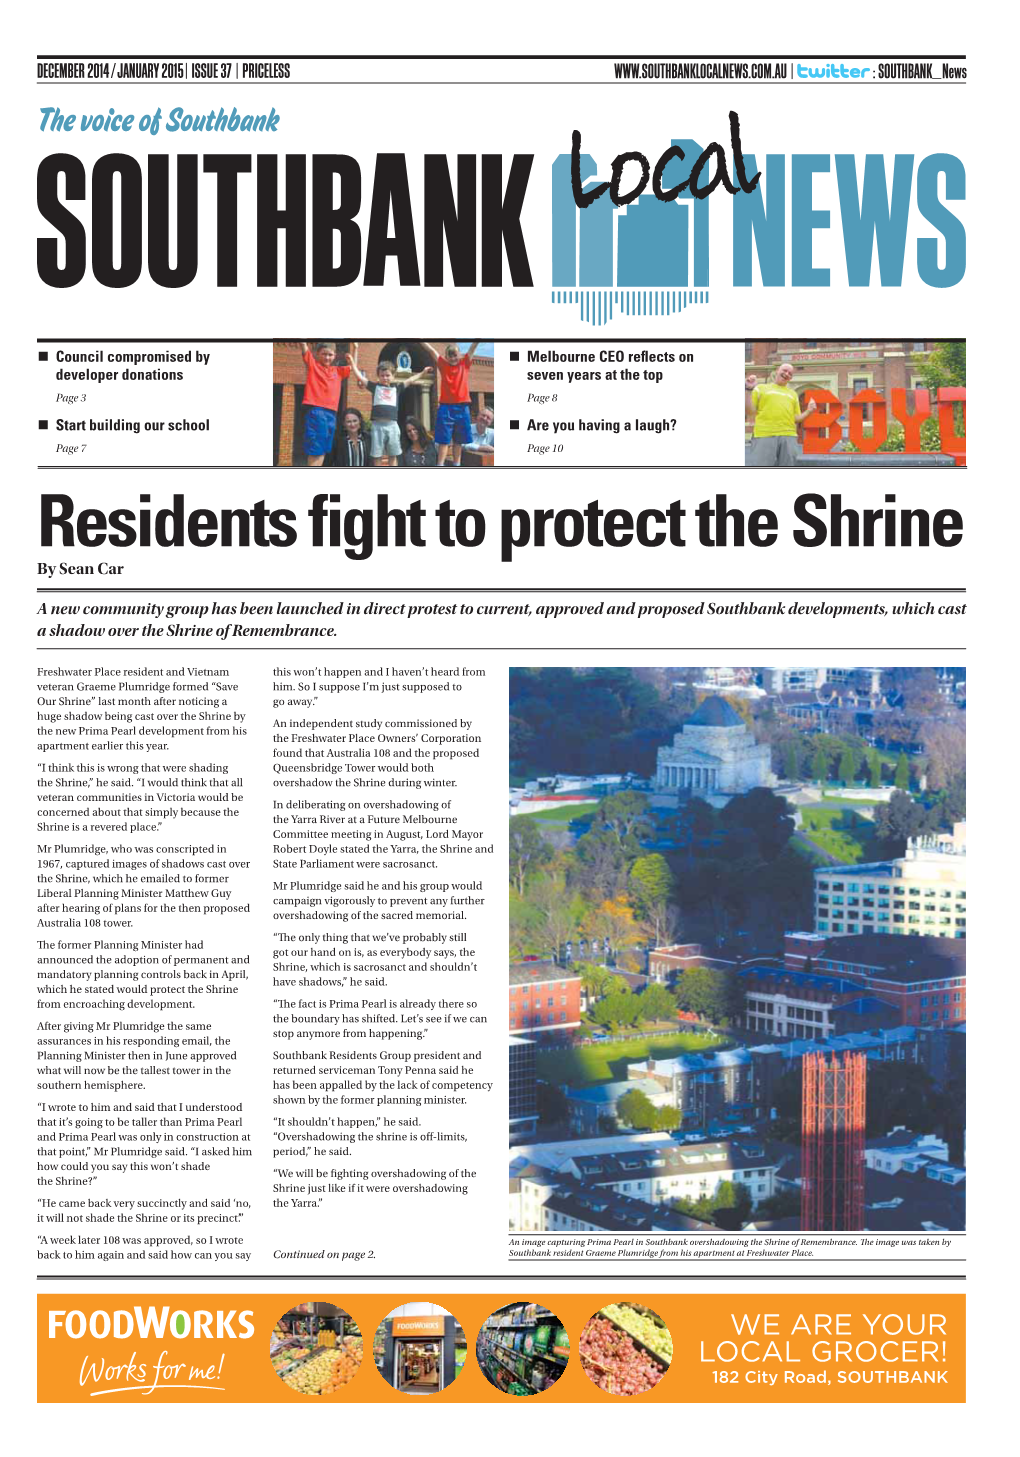 Residents Fight to Protect the Shrine